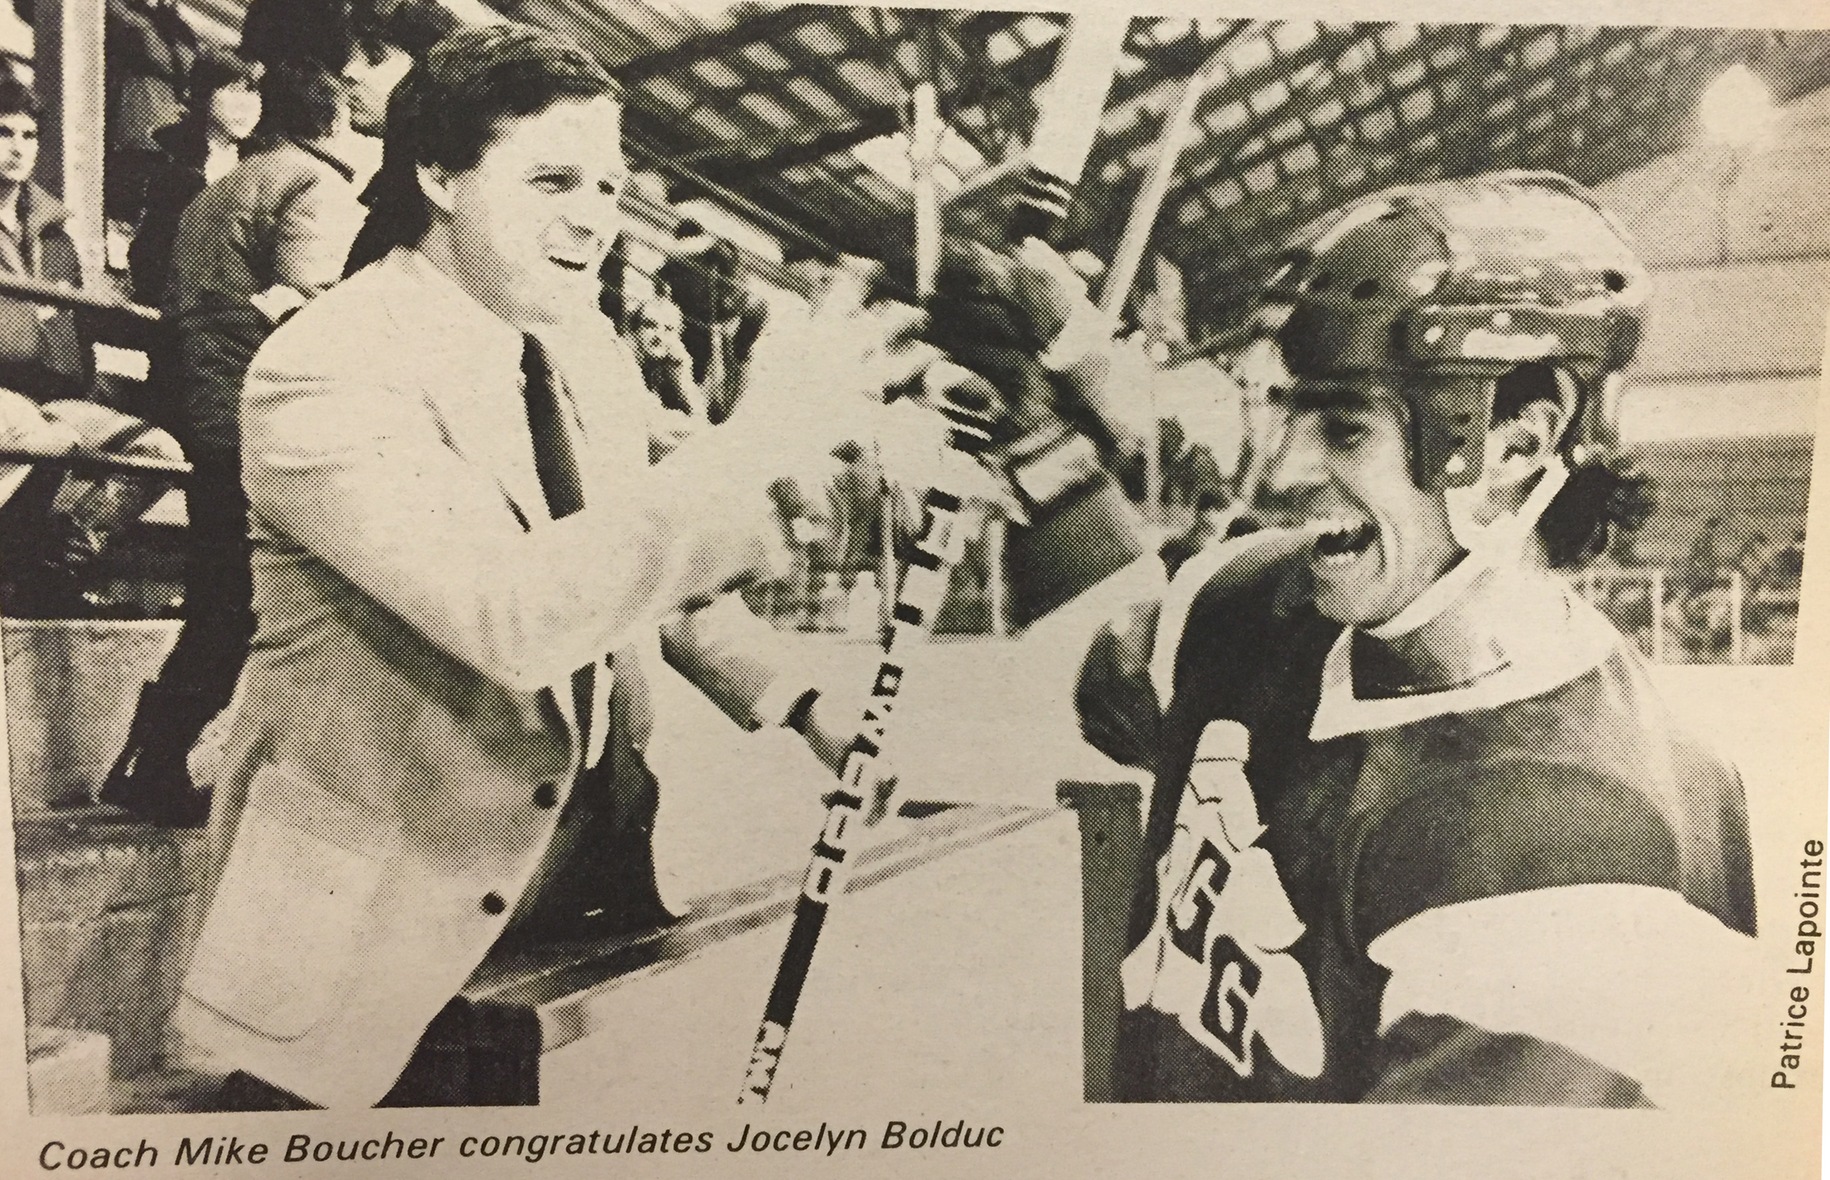 Black and white newspaper clipping with the caption: Coach Mike Boucher congratulates Jocelyn Bolduc. Patrice Lapointe.